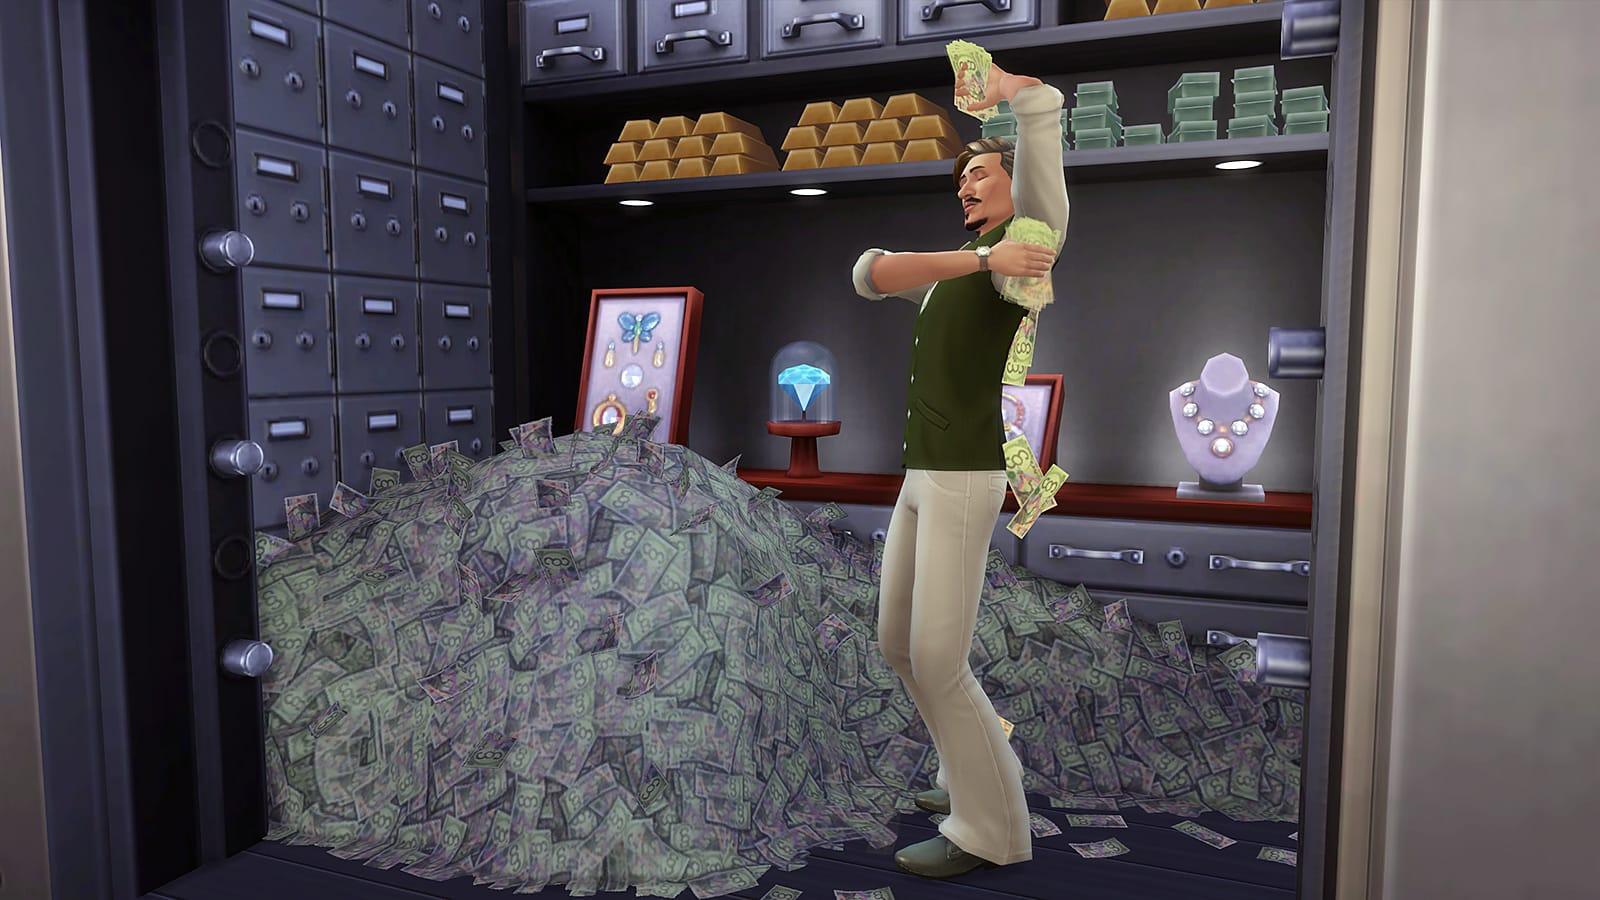 The Sims 4: How To Make Money - Cheats, Careers, Scavenging & More